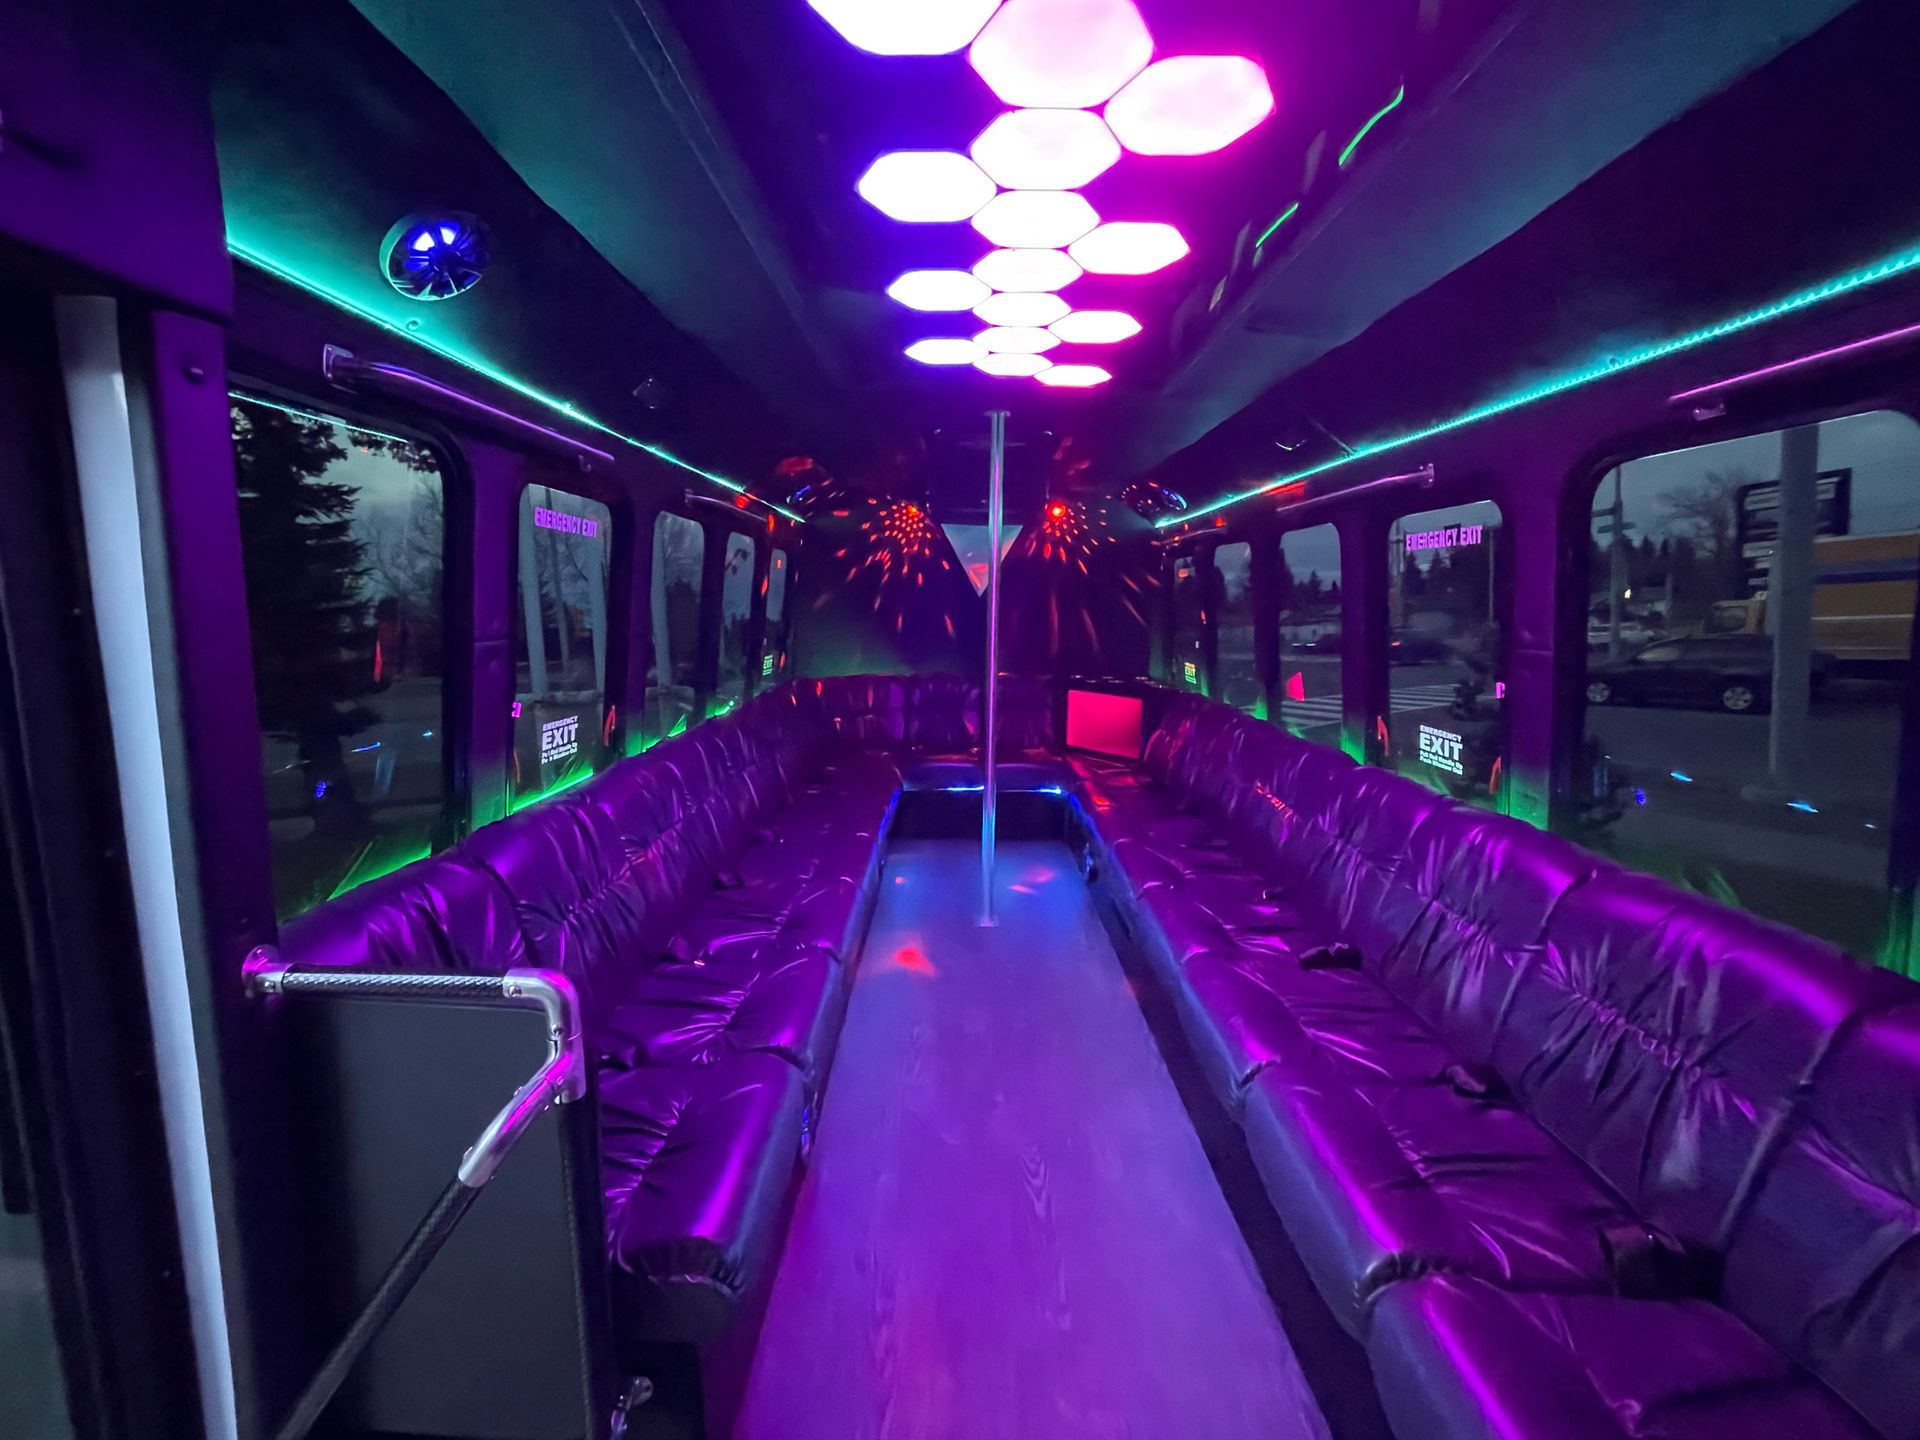 a limo to go party bus with purple seats and a sign that says exit